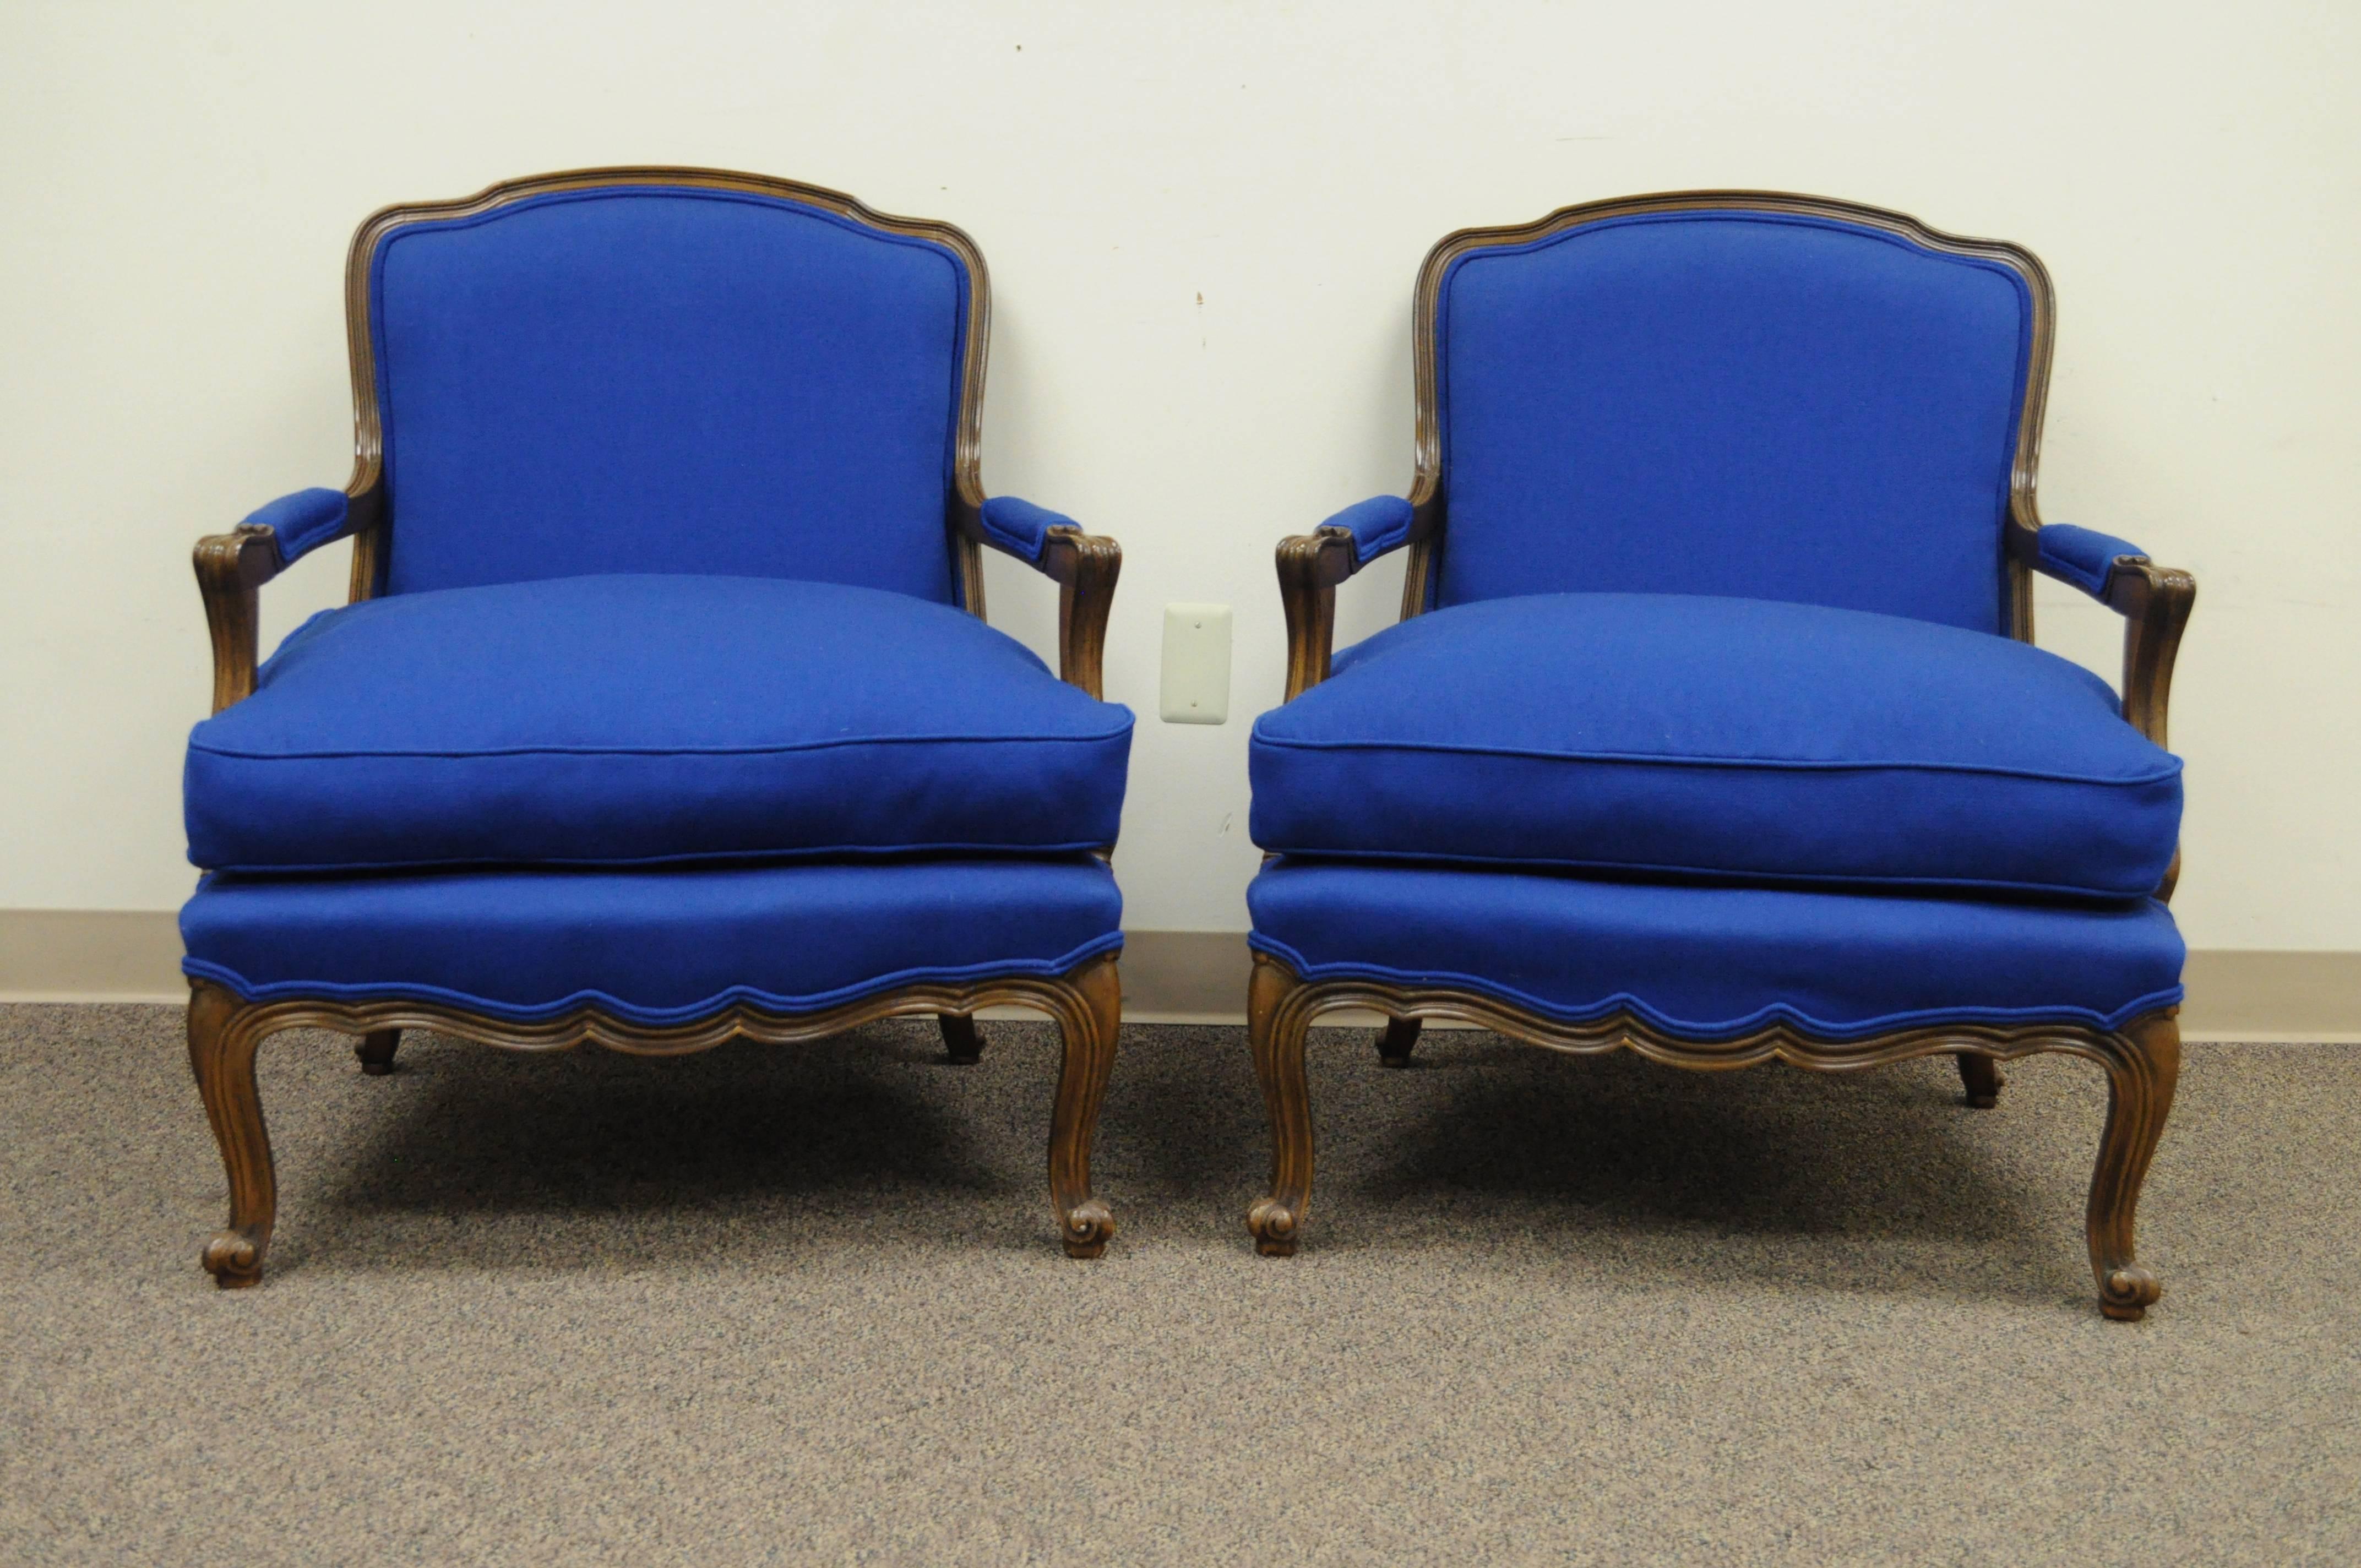 Pair of original blue upholstered Bergeres made for B. Altman & Co by Baker Furniture Co in the Country French / Louis XV Style. This quality pair of armchairs features solid walnut frames, cabriole legs, shaped lower rail, and Classic French form.